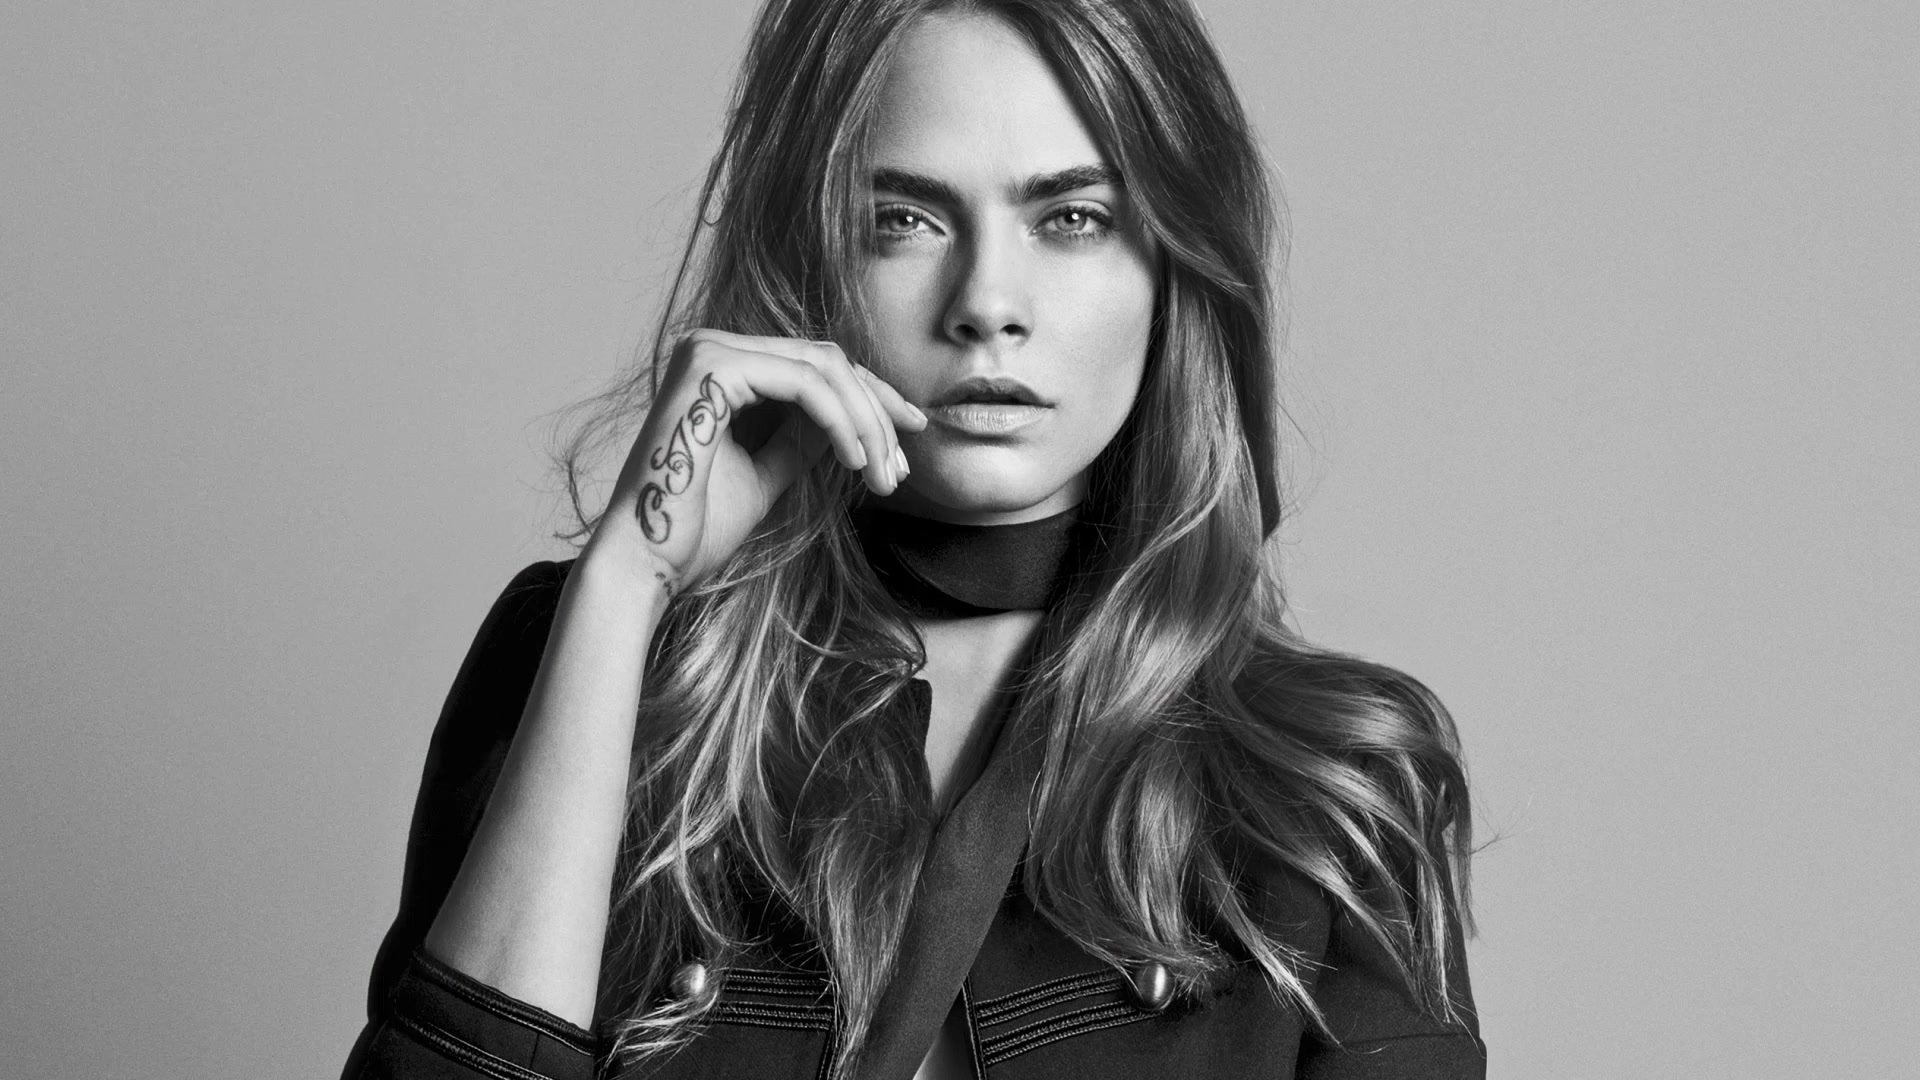 A black and white photograph of Cara Delevingne